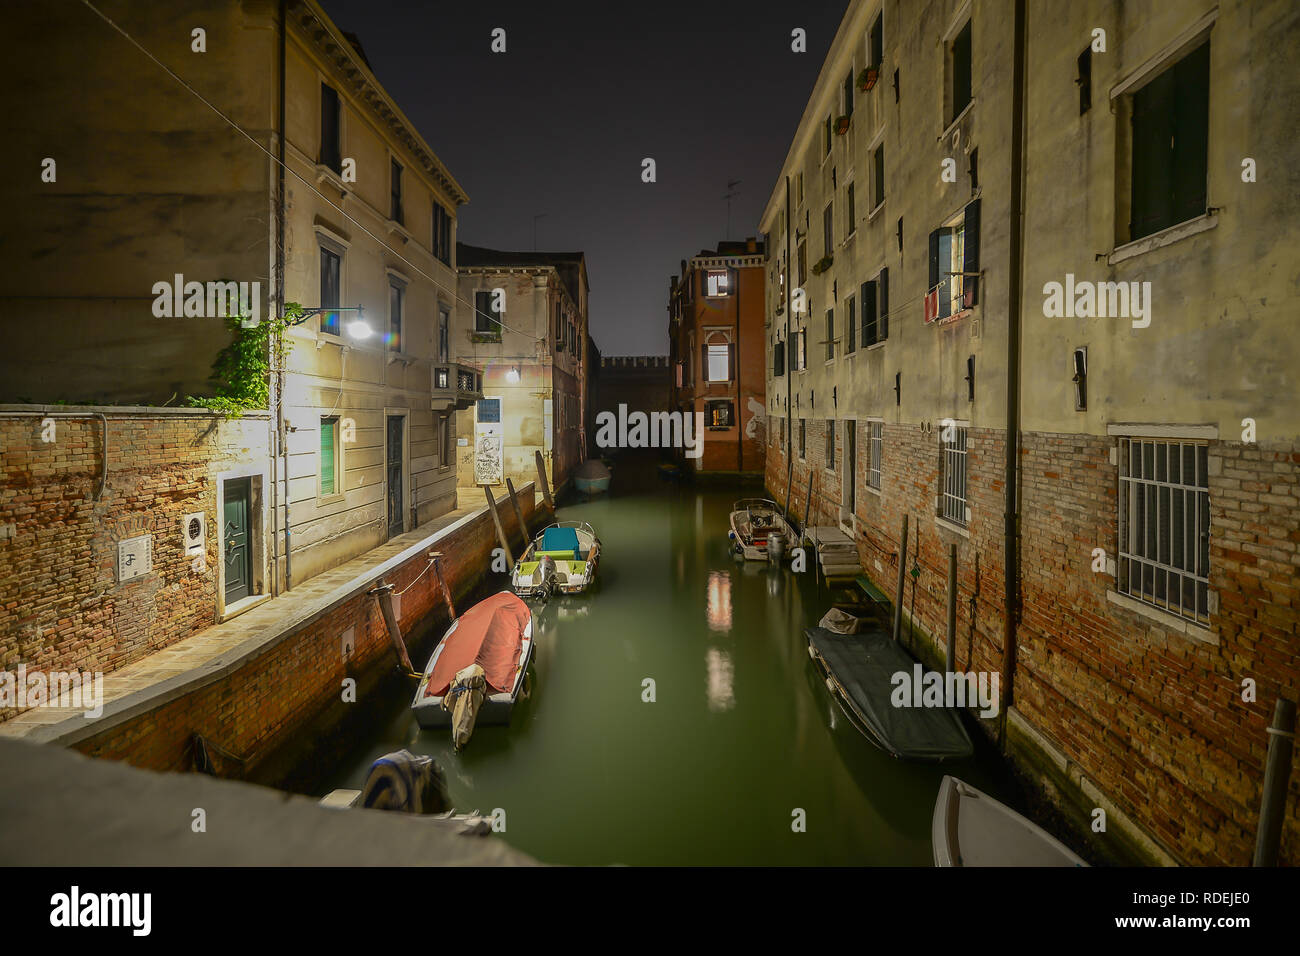 Canal in Venice at night Stock Photo